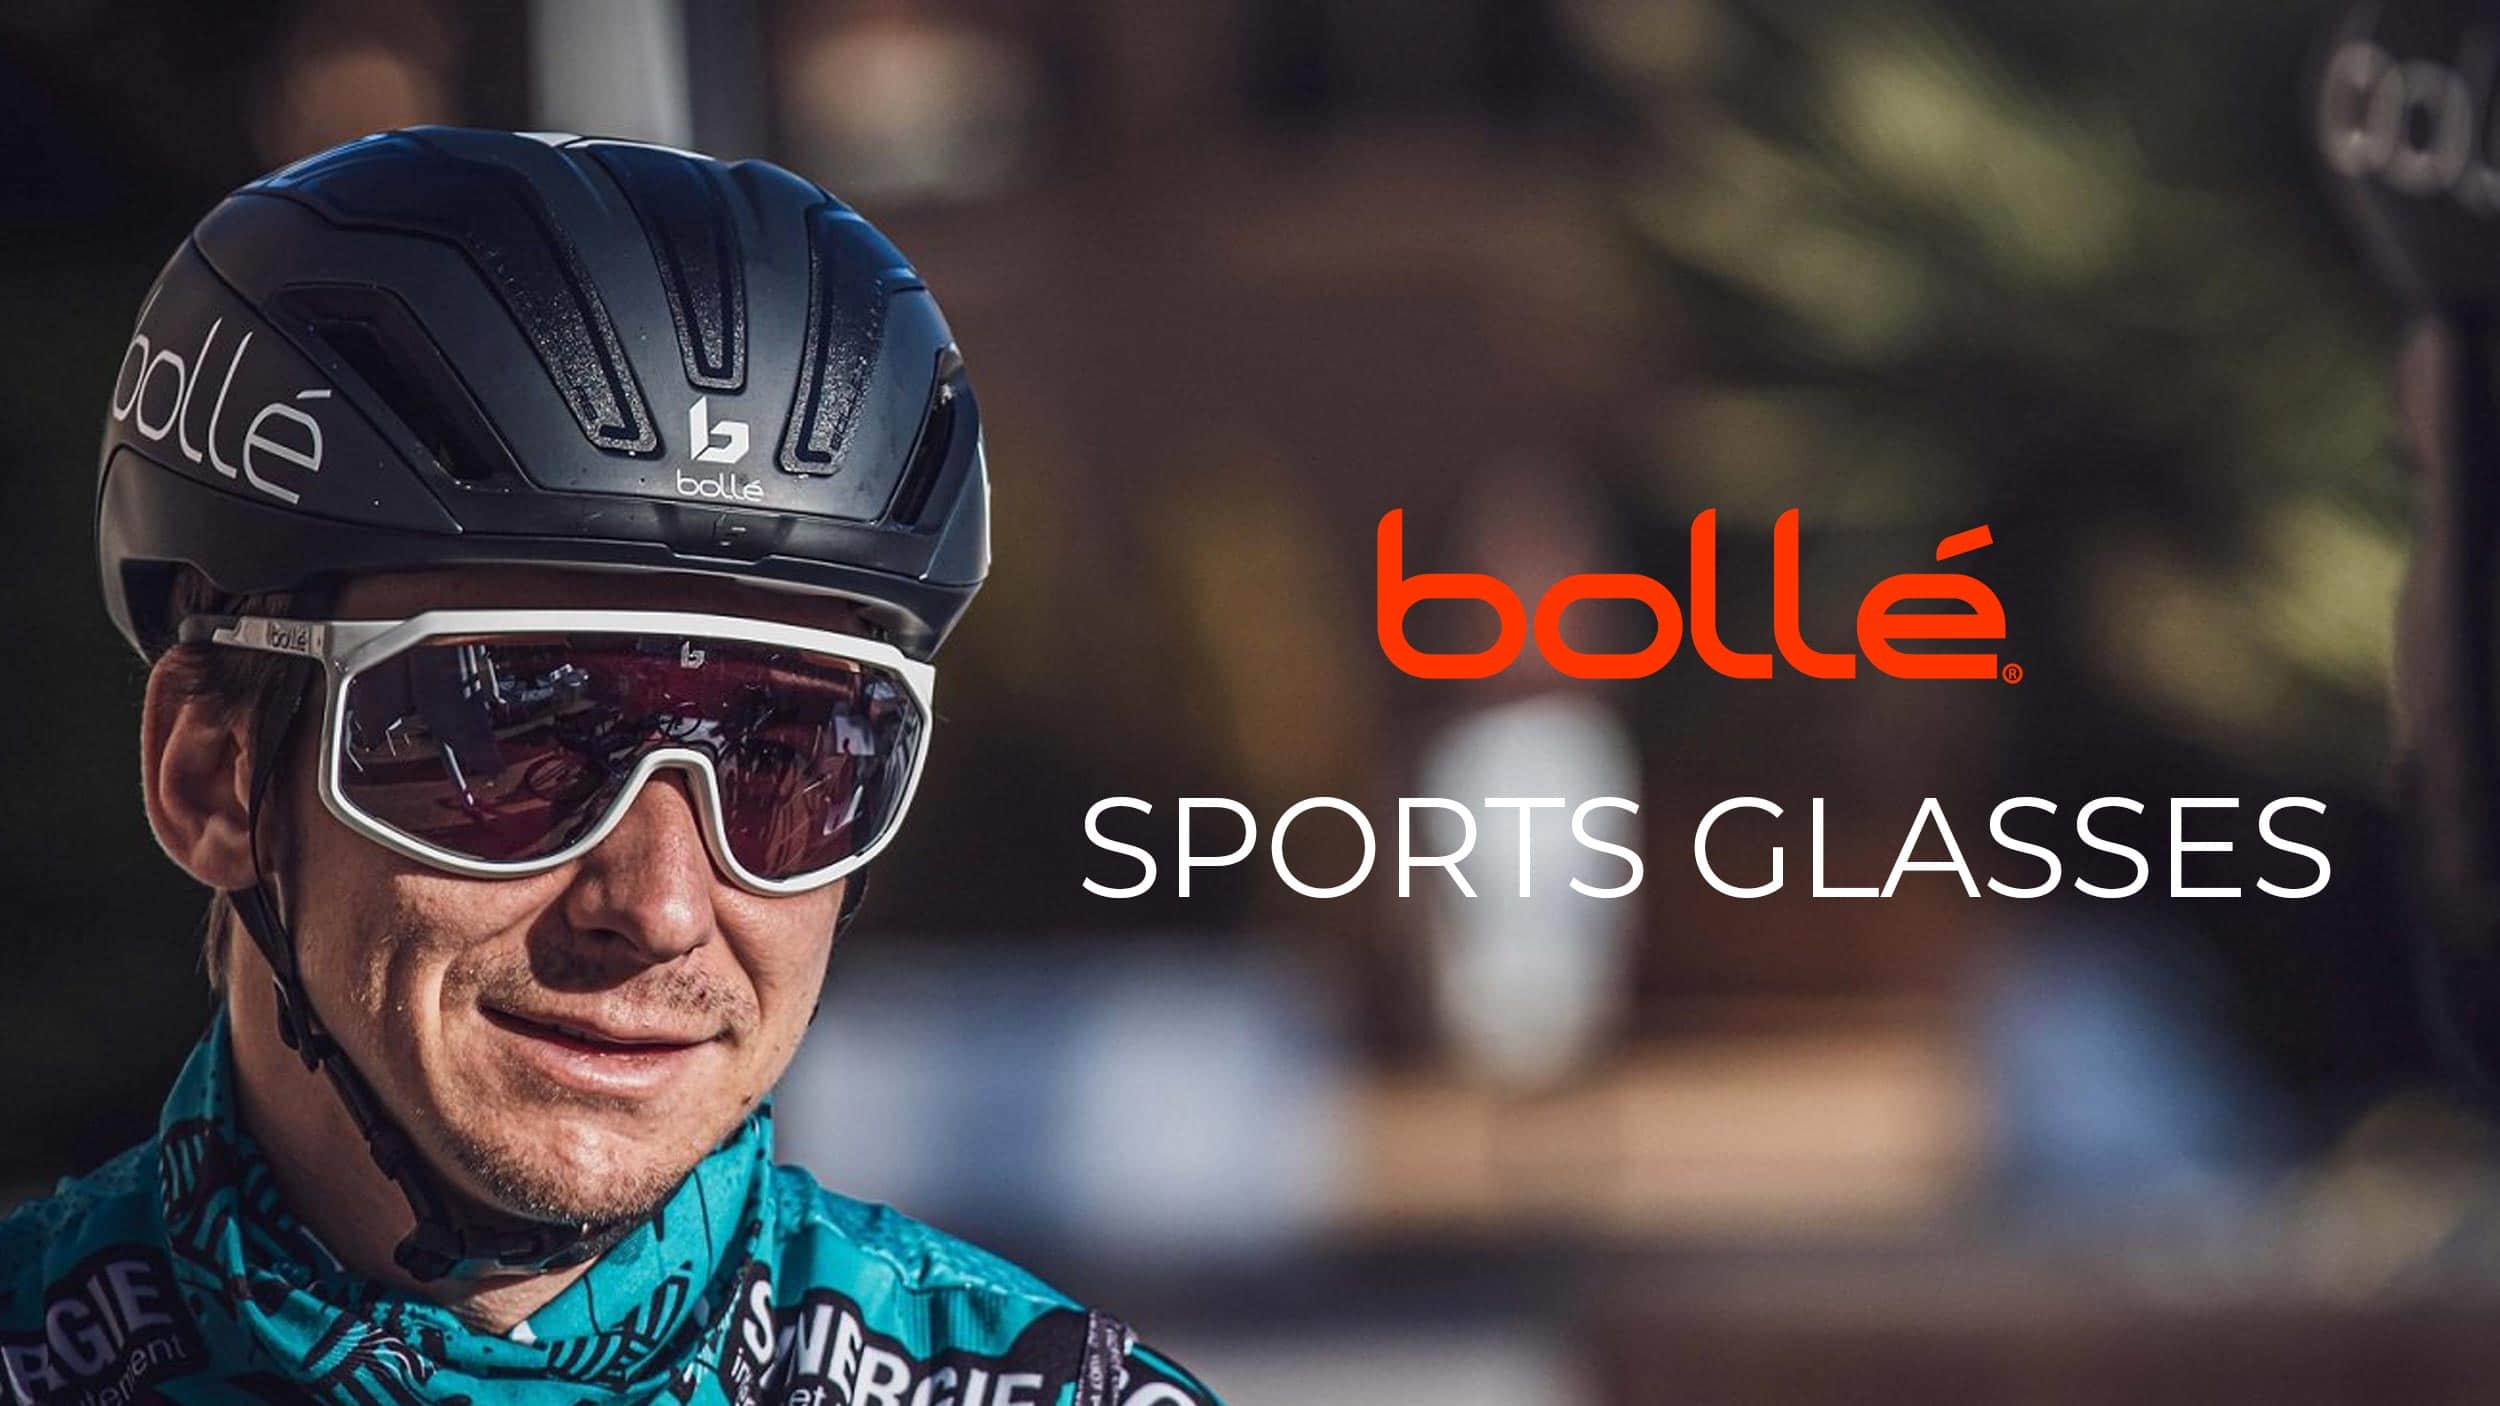 Safety goggles sports Glasses by BOLLE health and safety cyclists equipment rdg